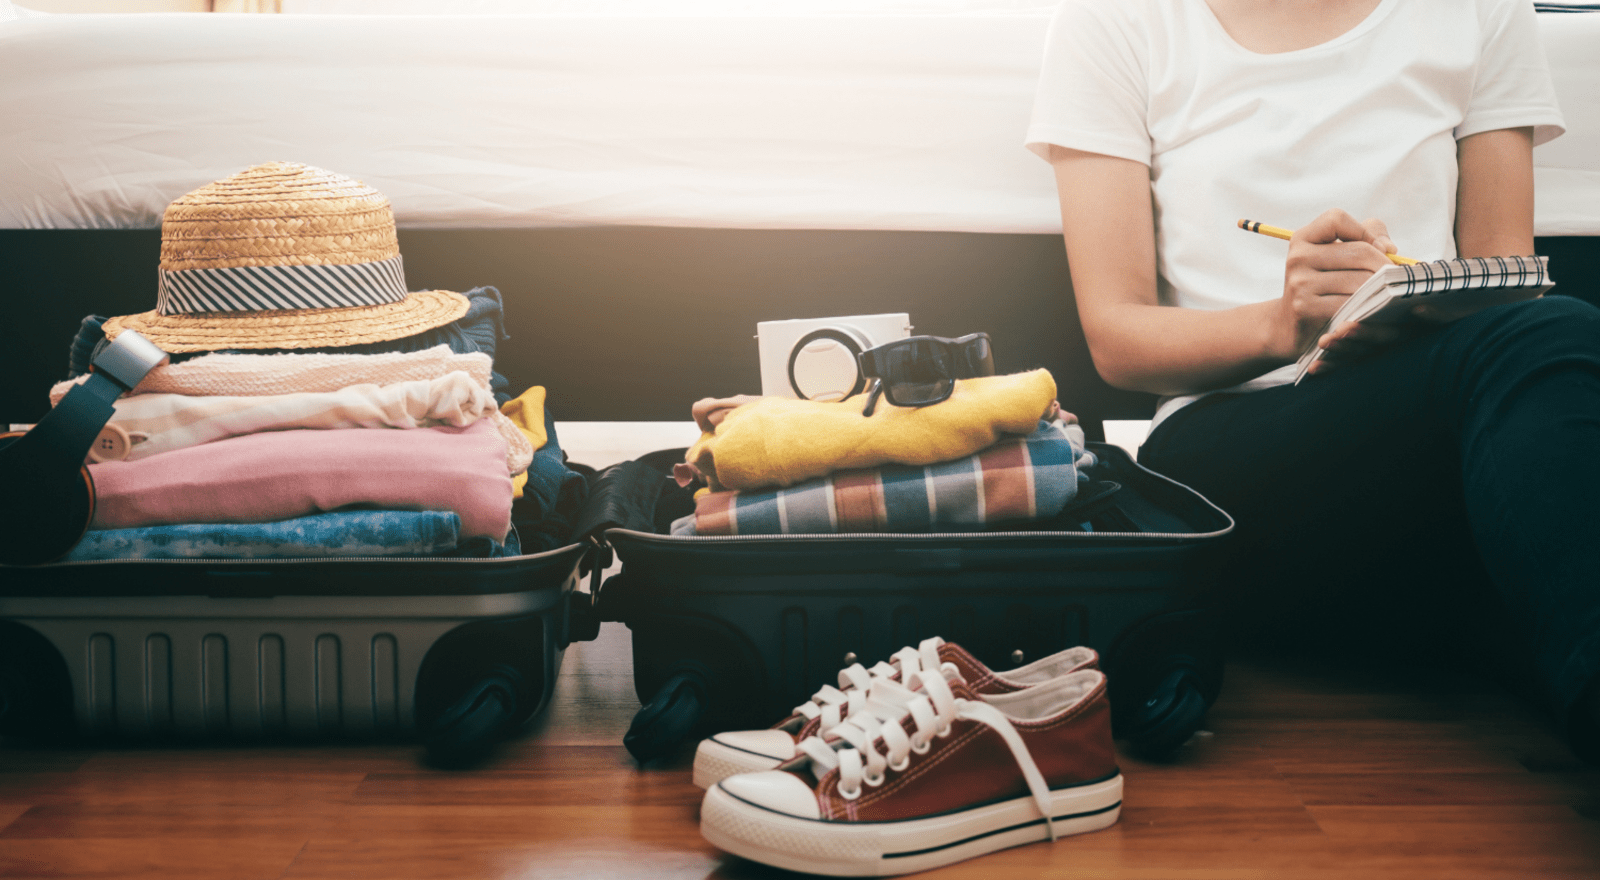 A woman marks off a checklist with items stacked in a suitcase